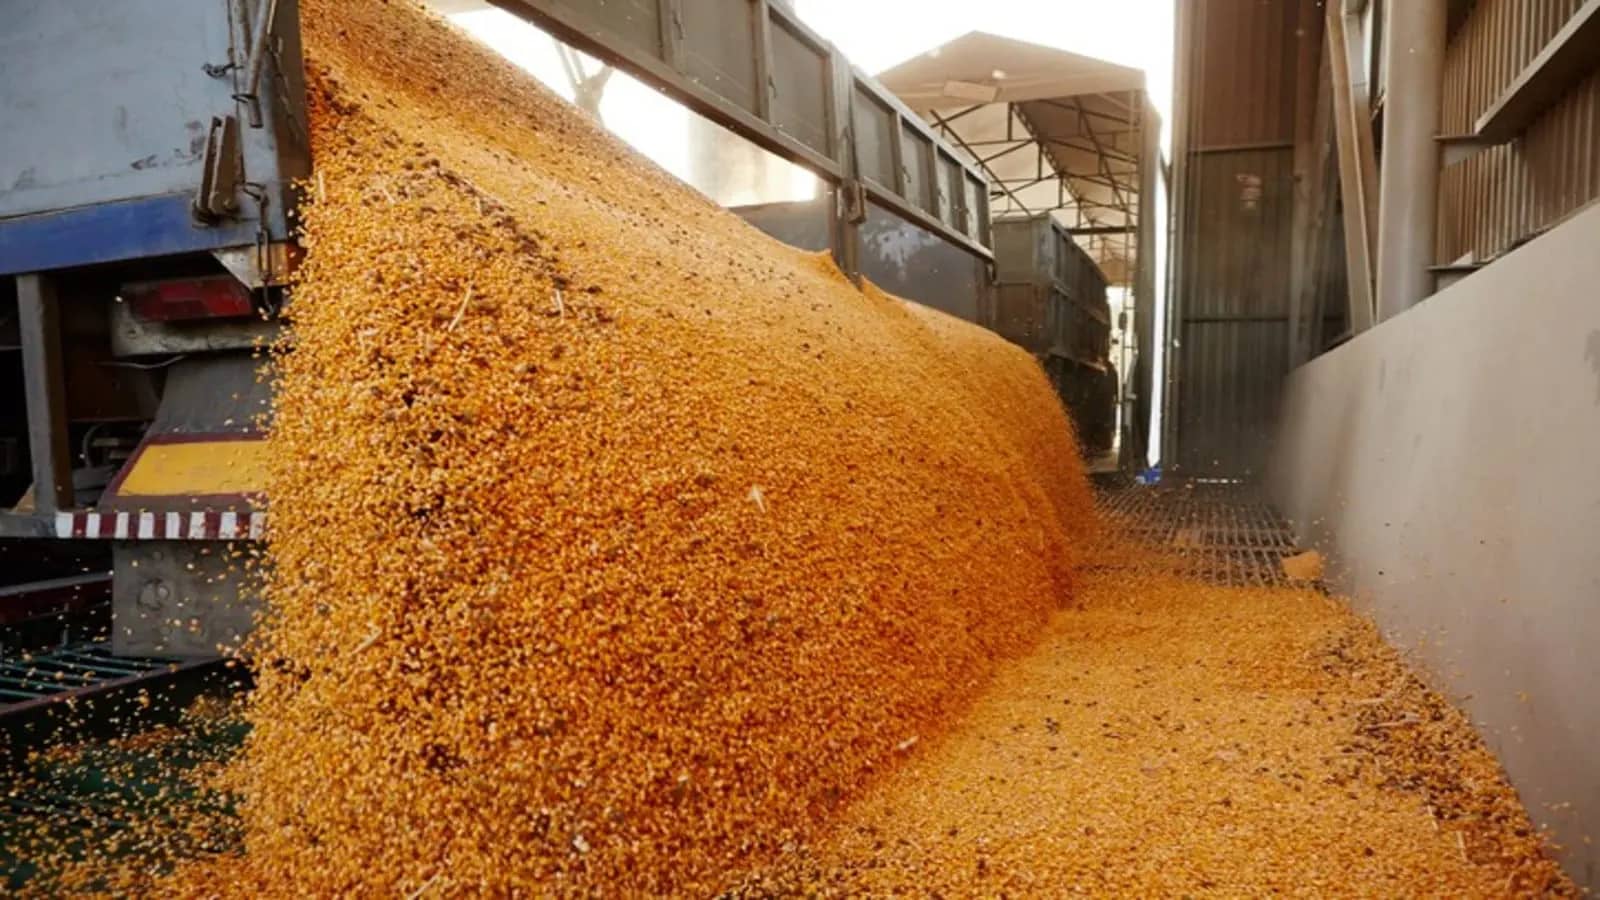 China plans to grow 40% more soybeans by 2025 to cut reliance on imports